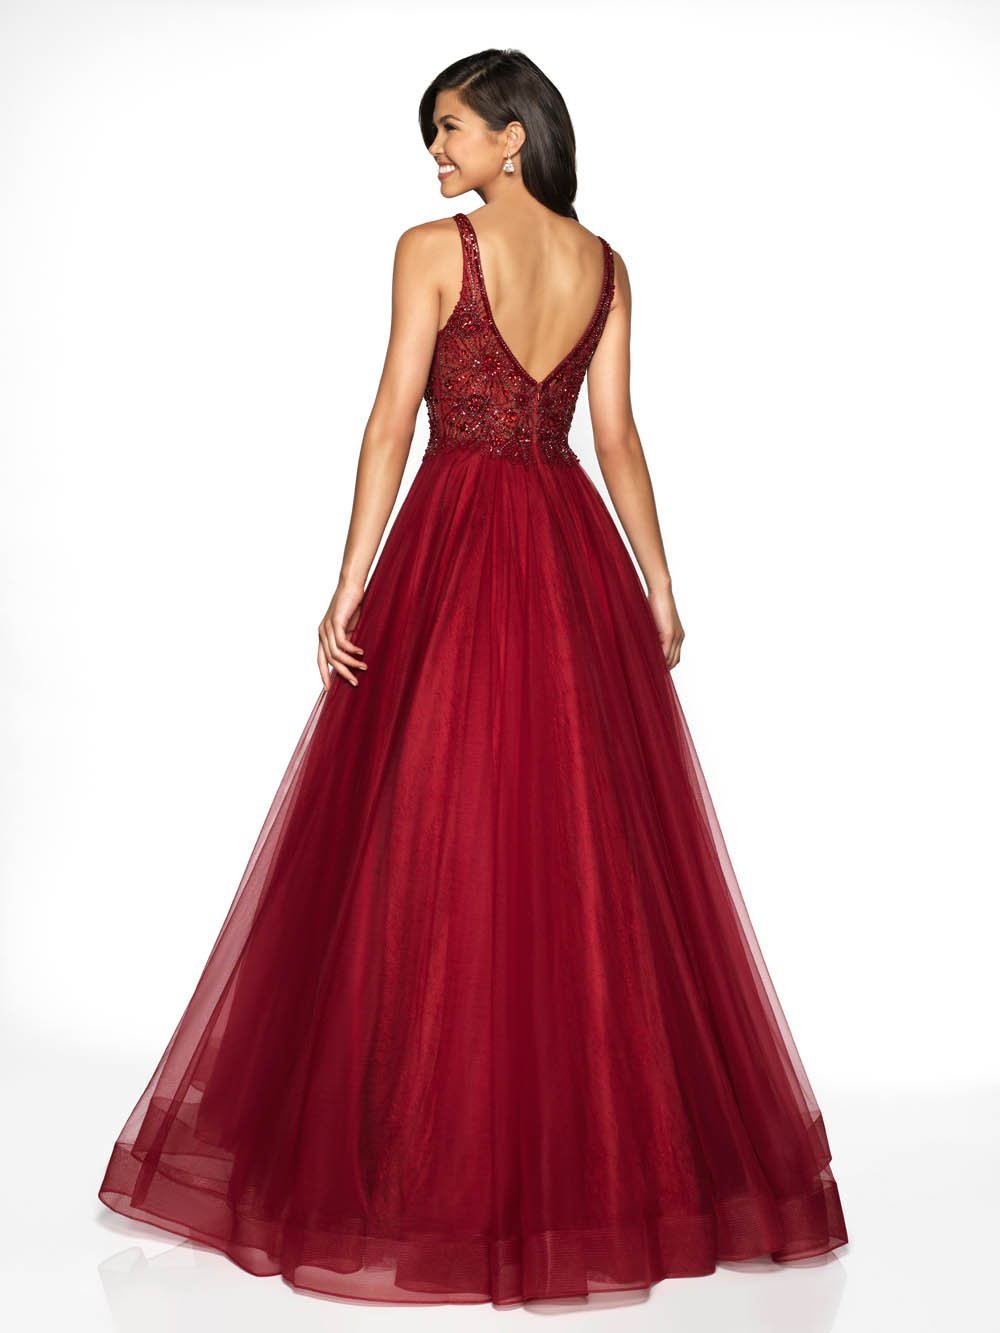 Flair Prom 19206 Dress Approach Prom Prom Dresses